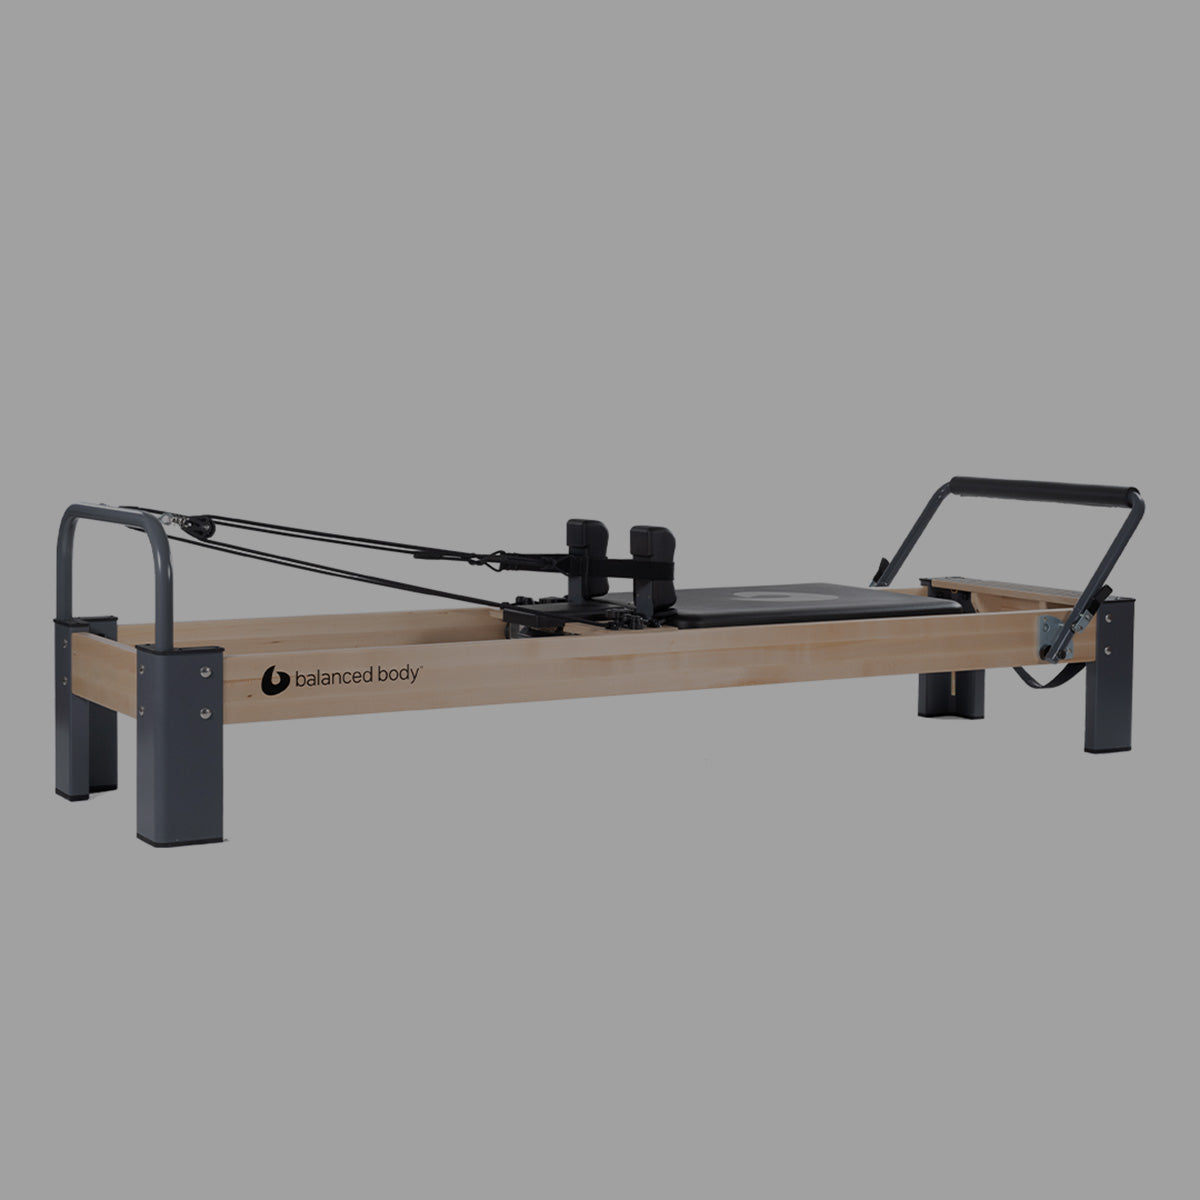 Rialto Reformer by Balanced Body Pilayes, It's all about the Rialto  Reformer from Balanced Body.